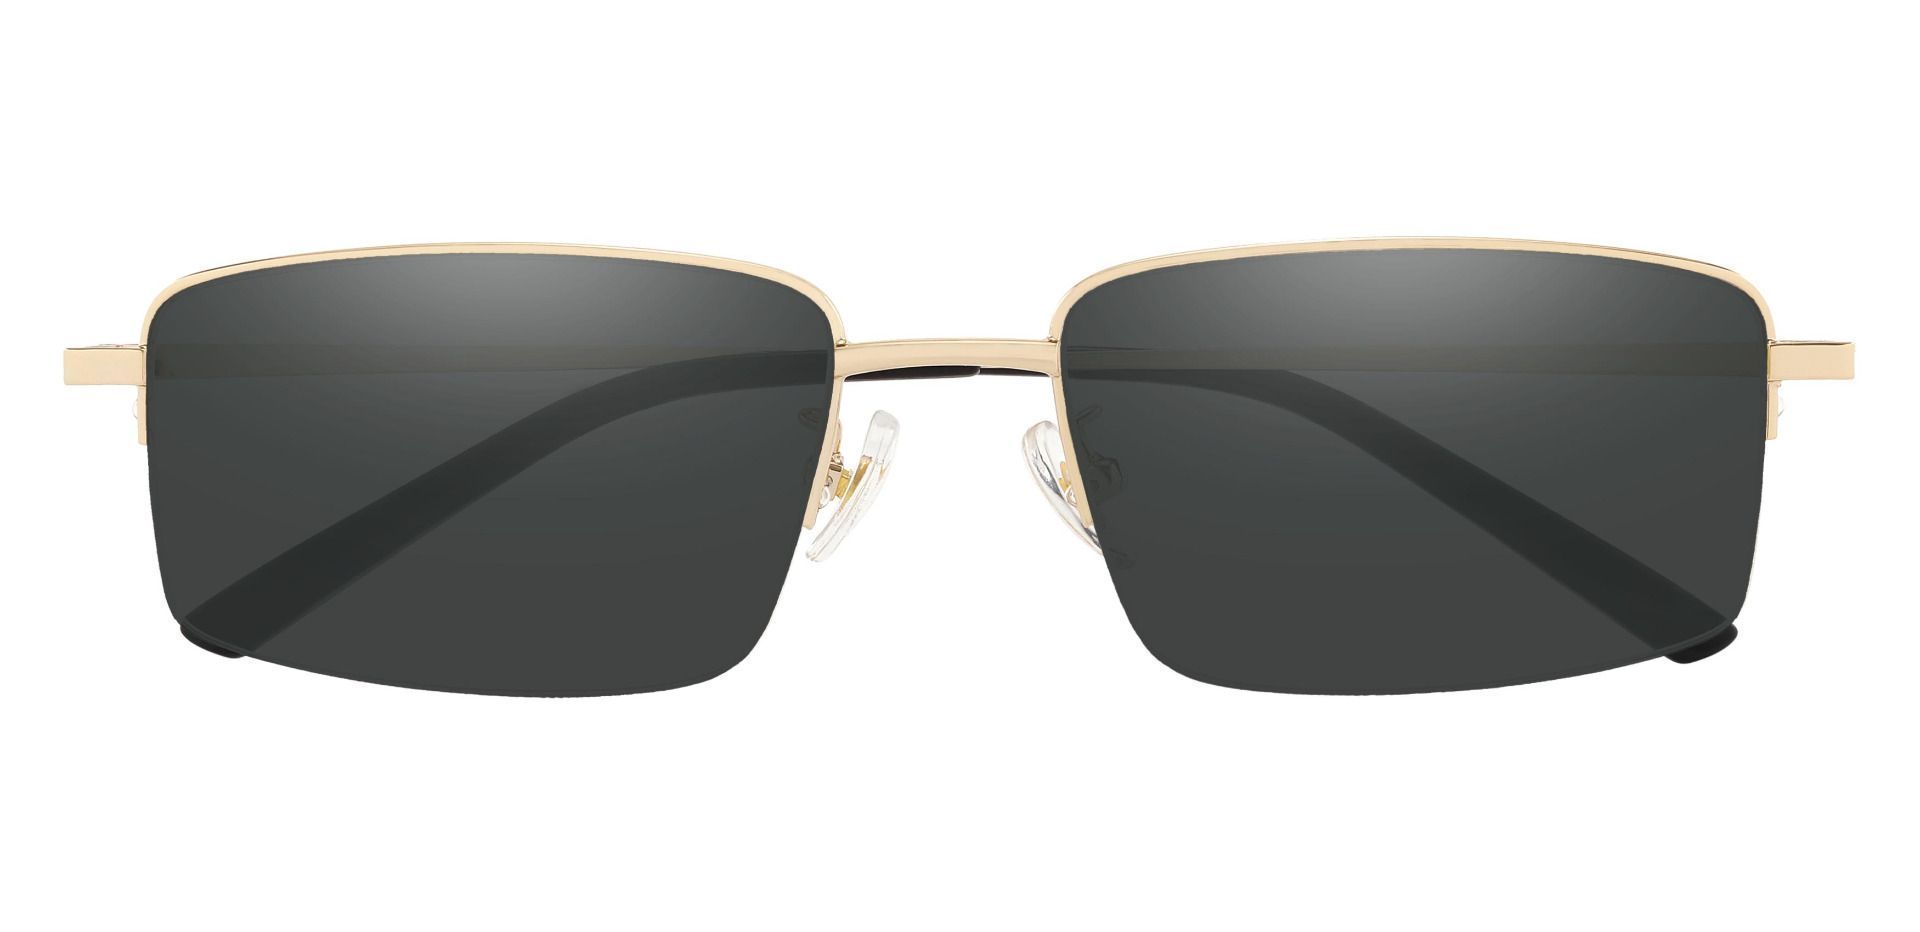 Wayne Rectangle Lined Bifocal Sunglasses - Gold Frame With Gray Lenses